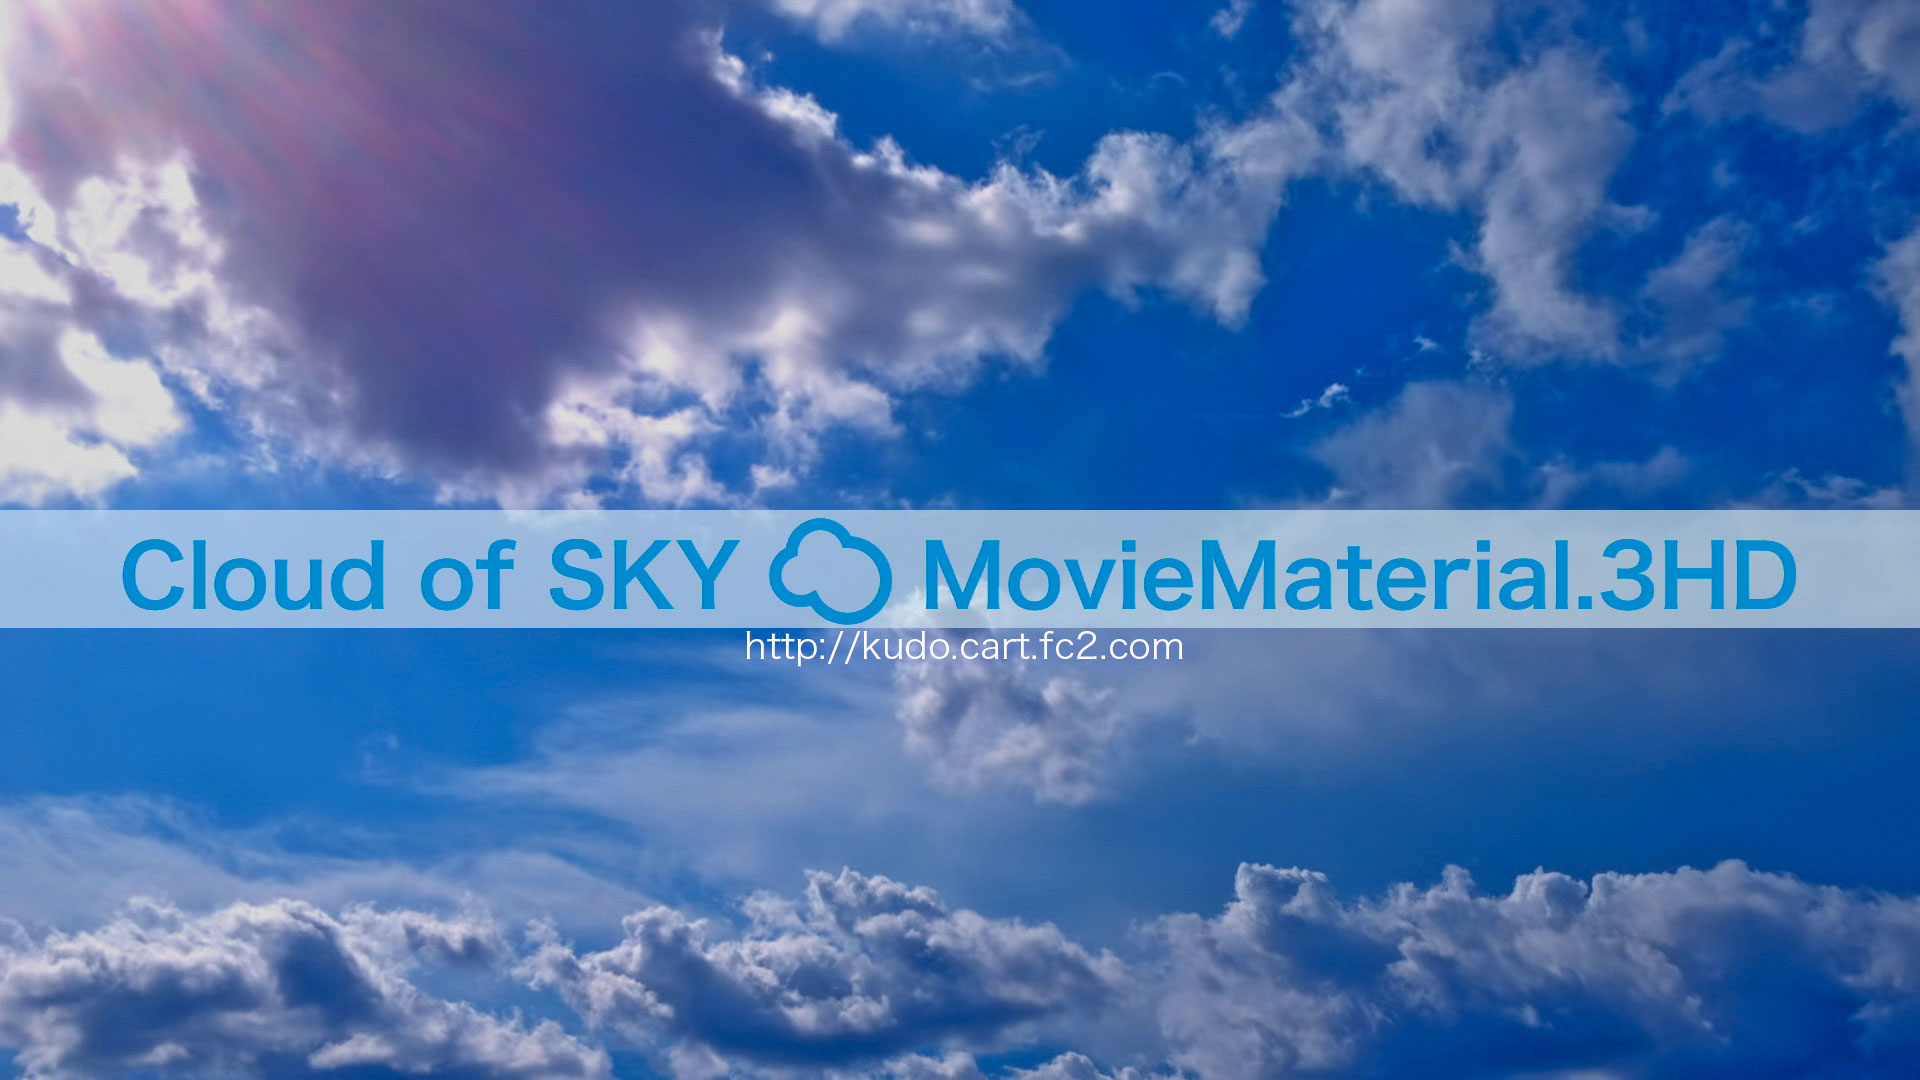 【Cloud of SKY MovieMaterial.HDSET】 ロイヤリティフリー フルハイビジョン動画素材集 Image.6